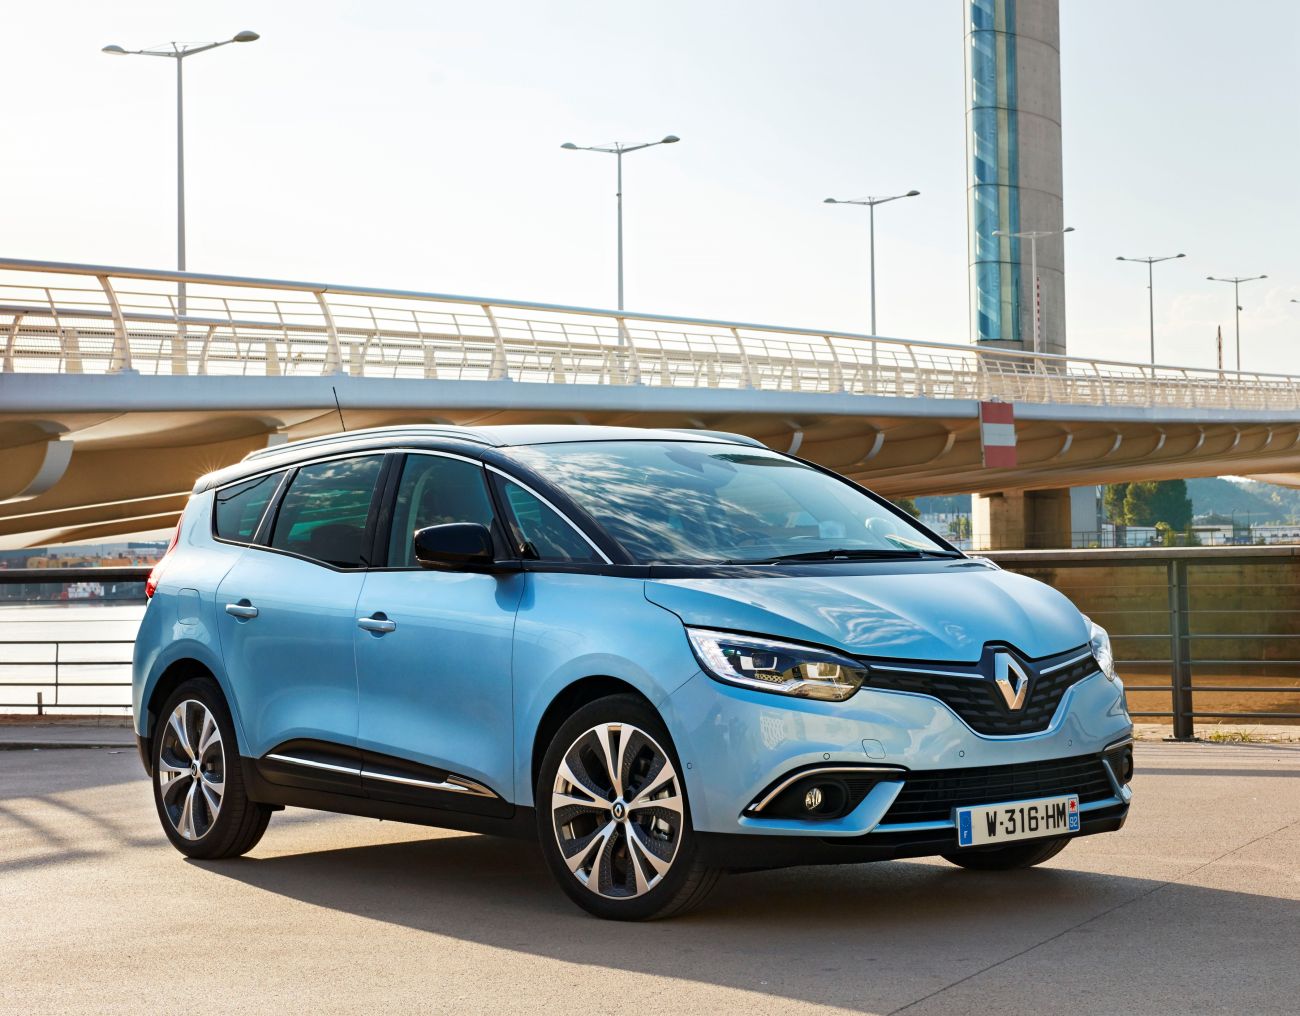 81460_2016_Drive_tests_New_Renault_GRAND_SCENIC_in_the_Bordeaux_region